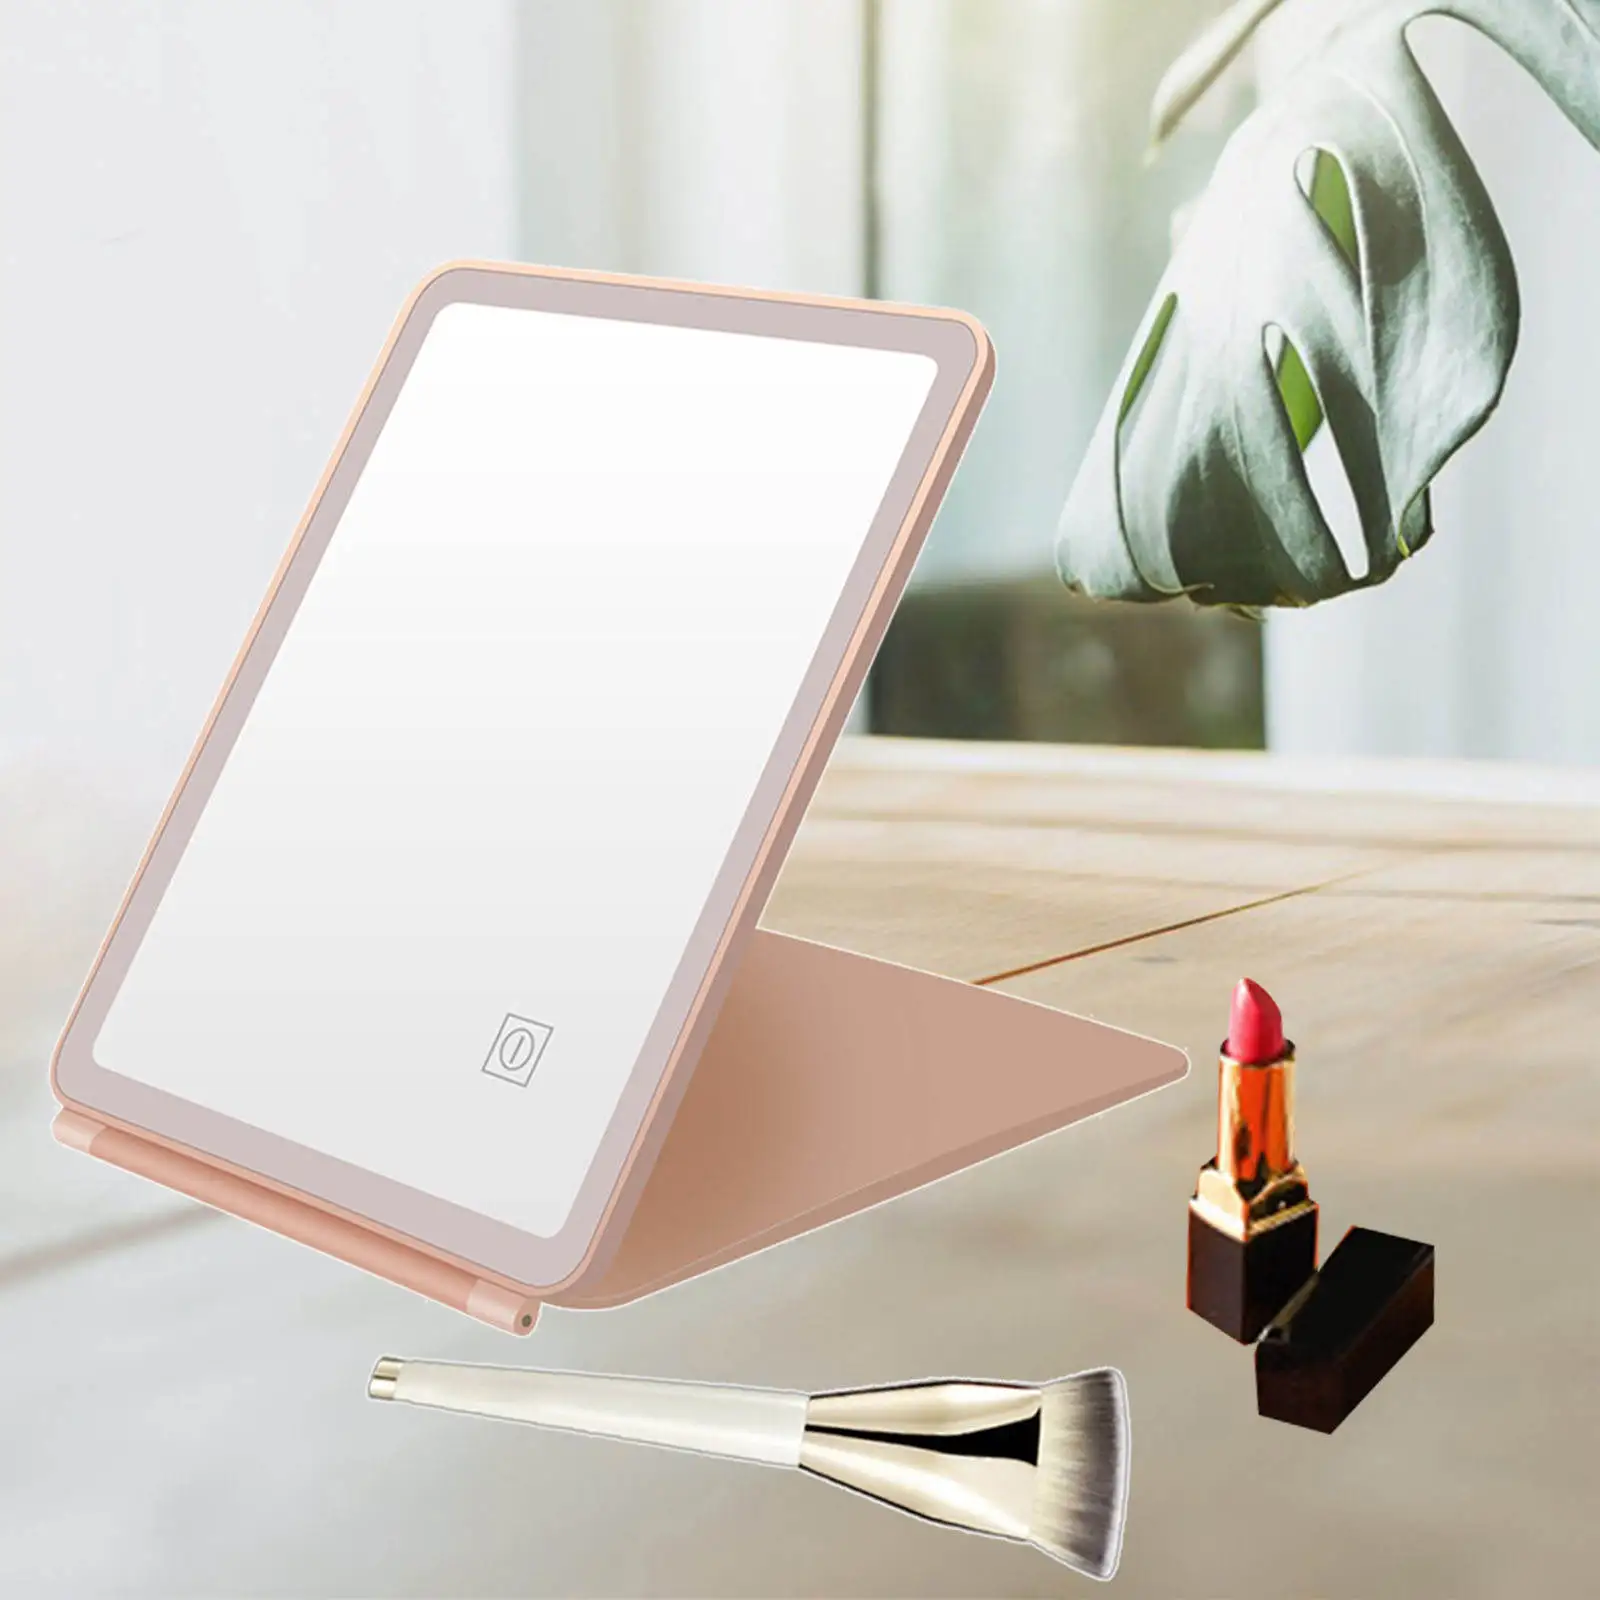 Folding LED Vanity Mirror Portable Touch Screen Compact HD Lighted Makeup Vanity Mirror for Cosmetic Makeup Gift Women Women